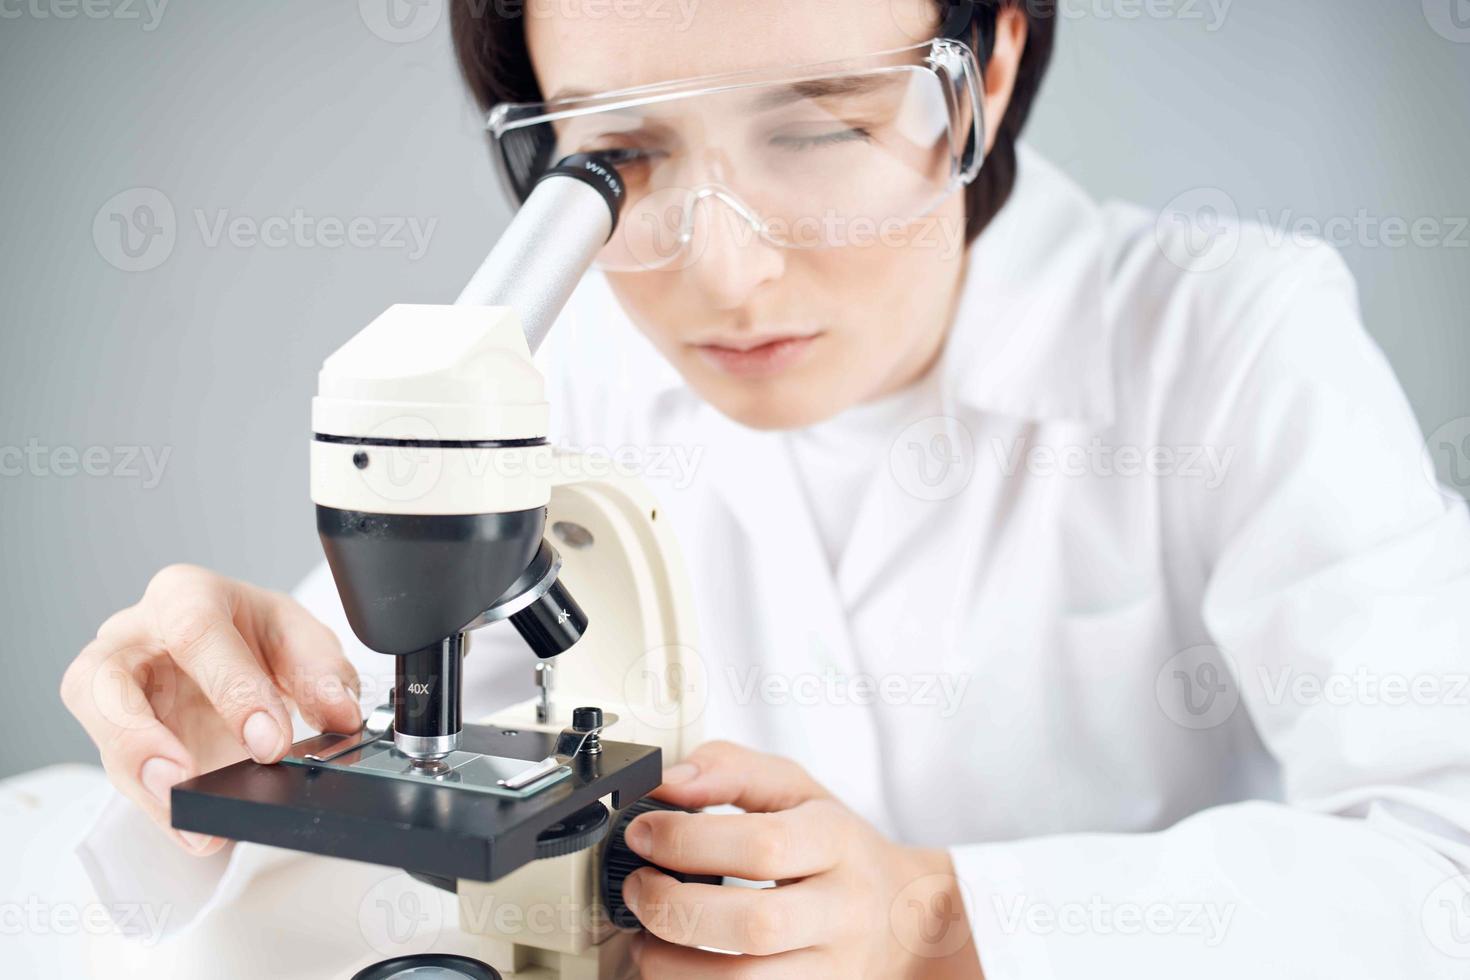 woman in laboratory looking through microscope close-up biotechnology science photo